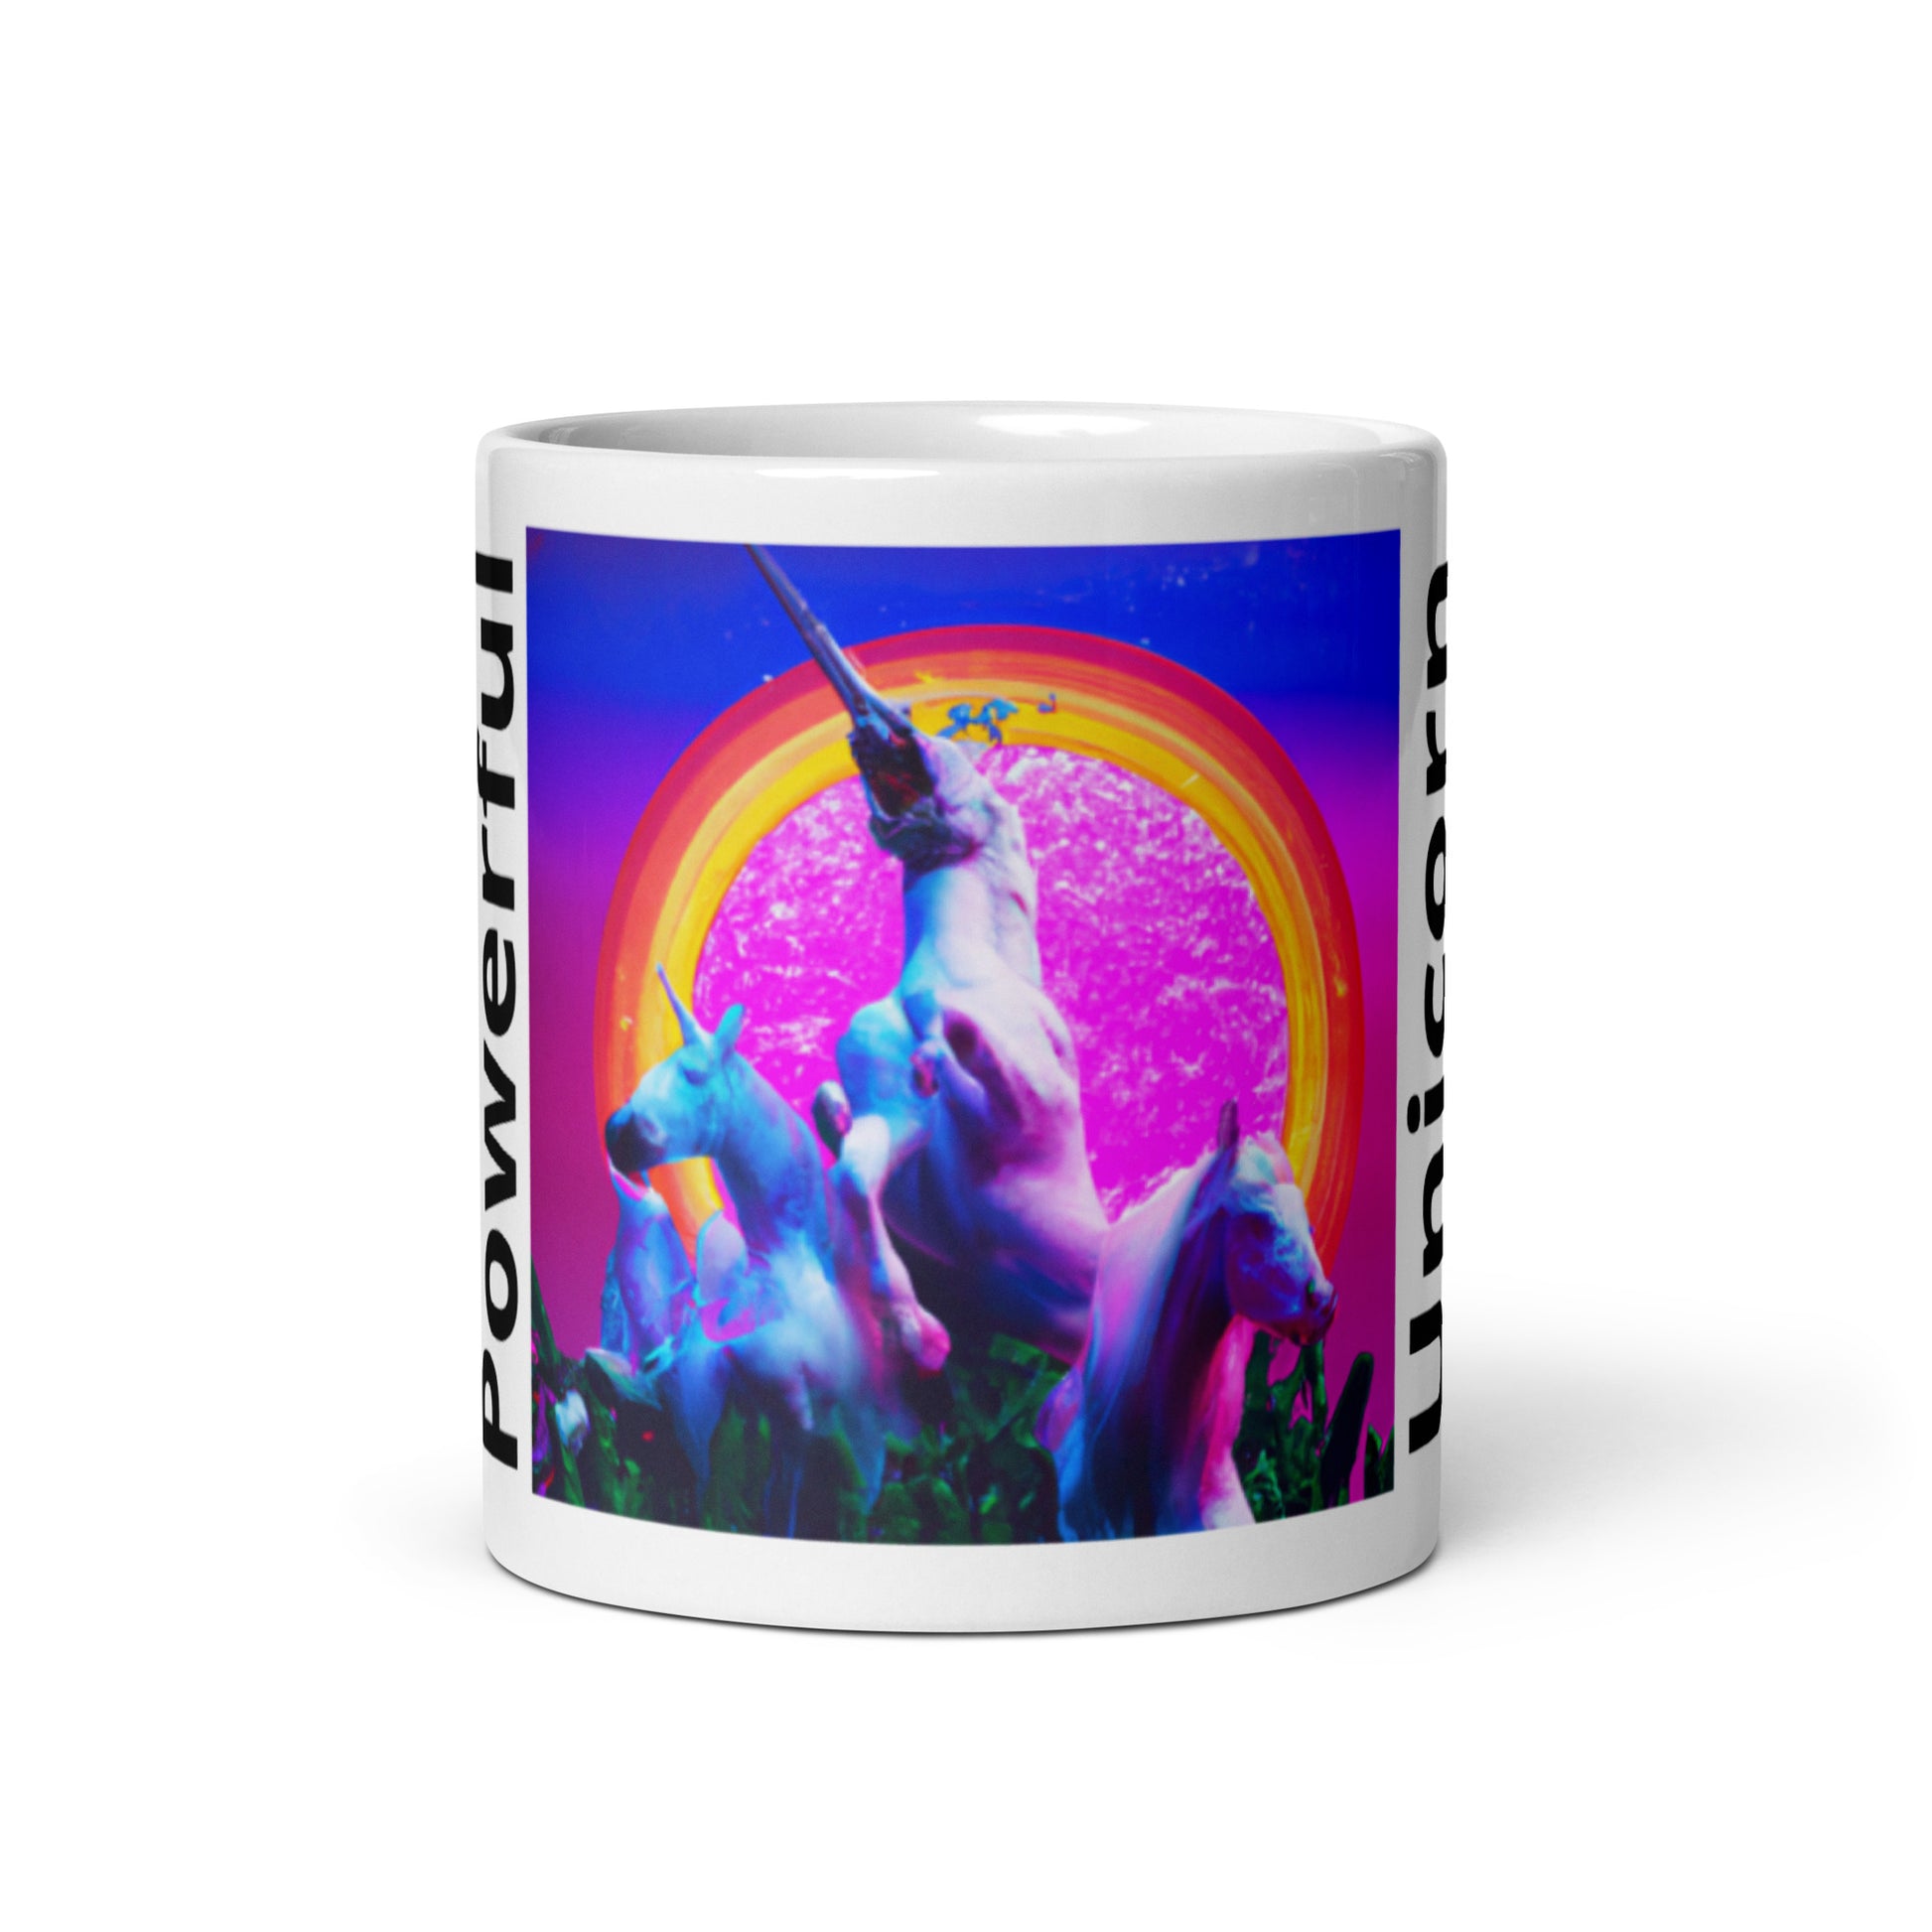 3 unicorns in a magical forest. The most powerful rears up infront of the rainbow portal.